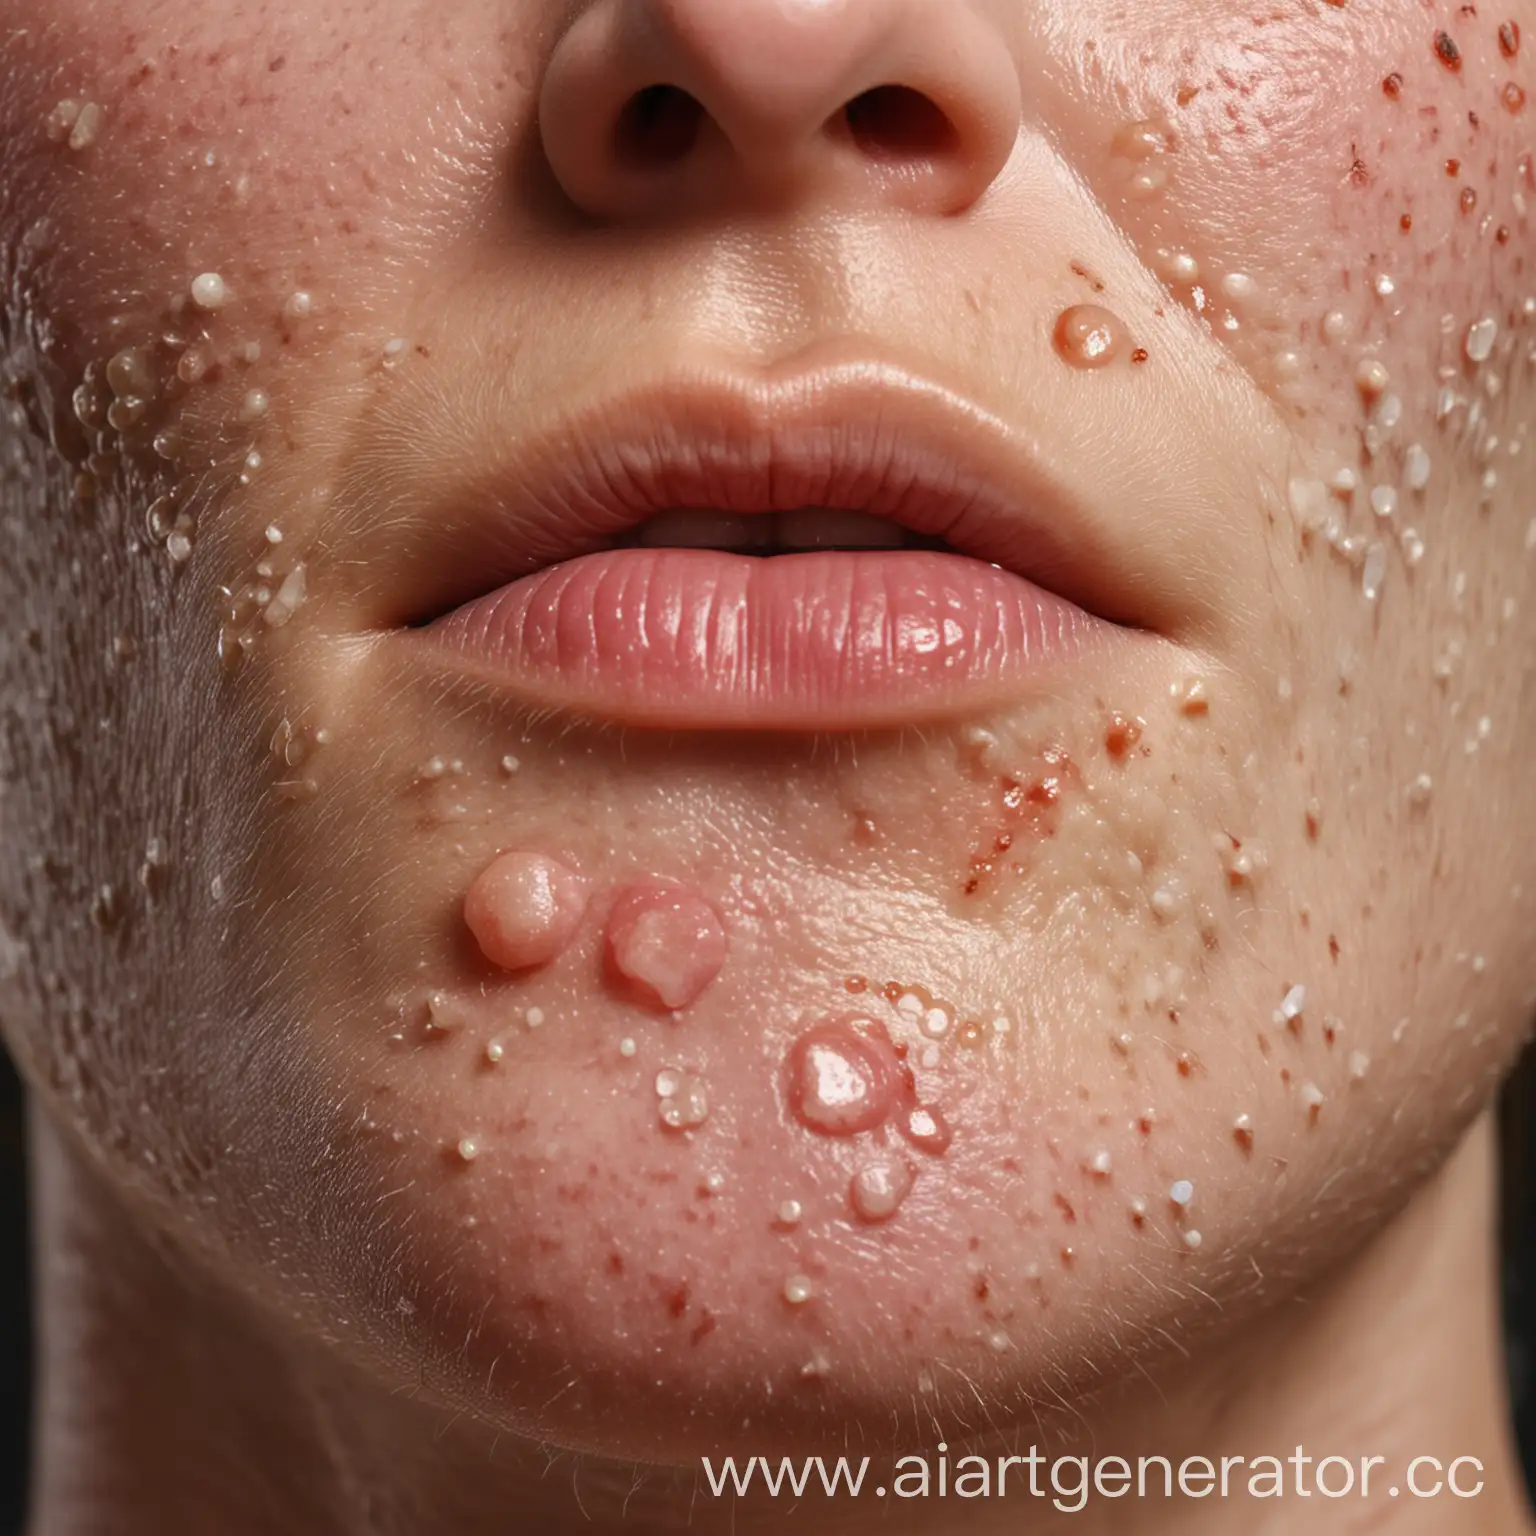 Detailed-CloseUp-of-Severe-Acne-Realistic-Representation-of-Inflamed-Skin